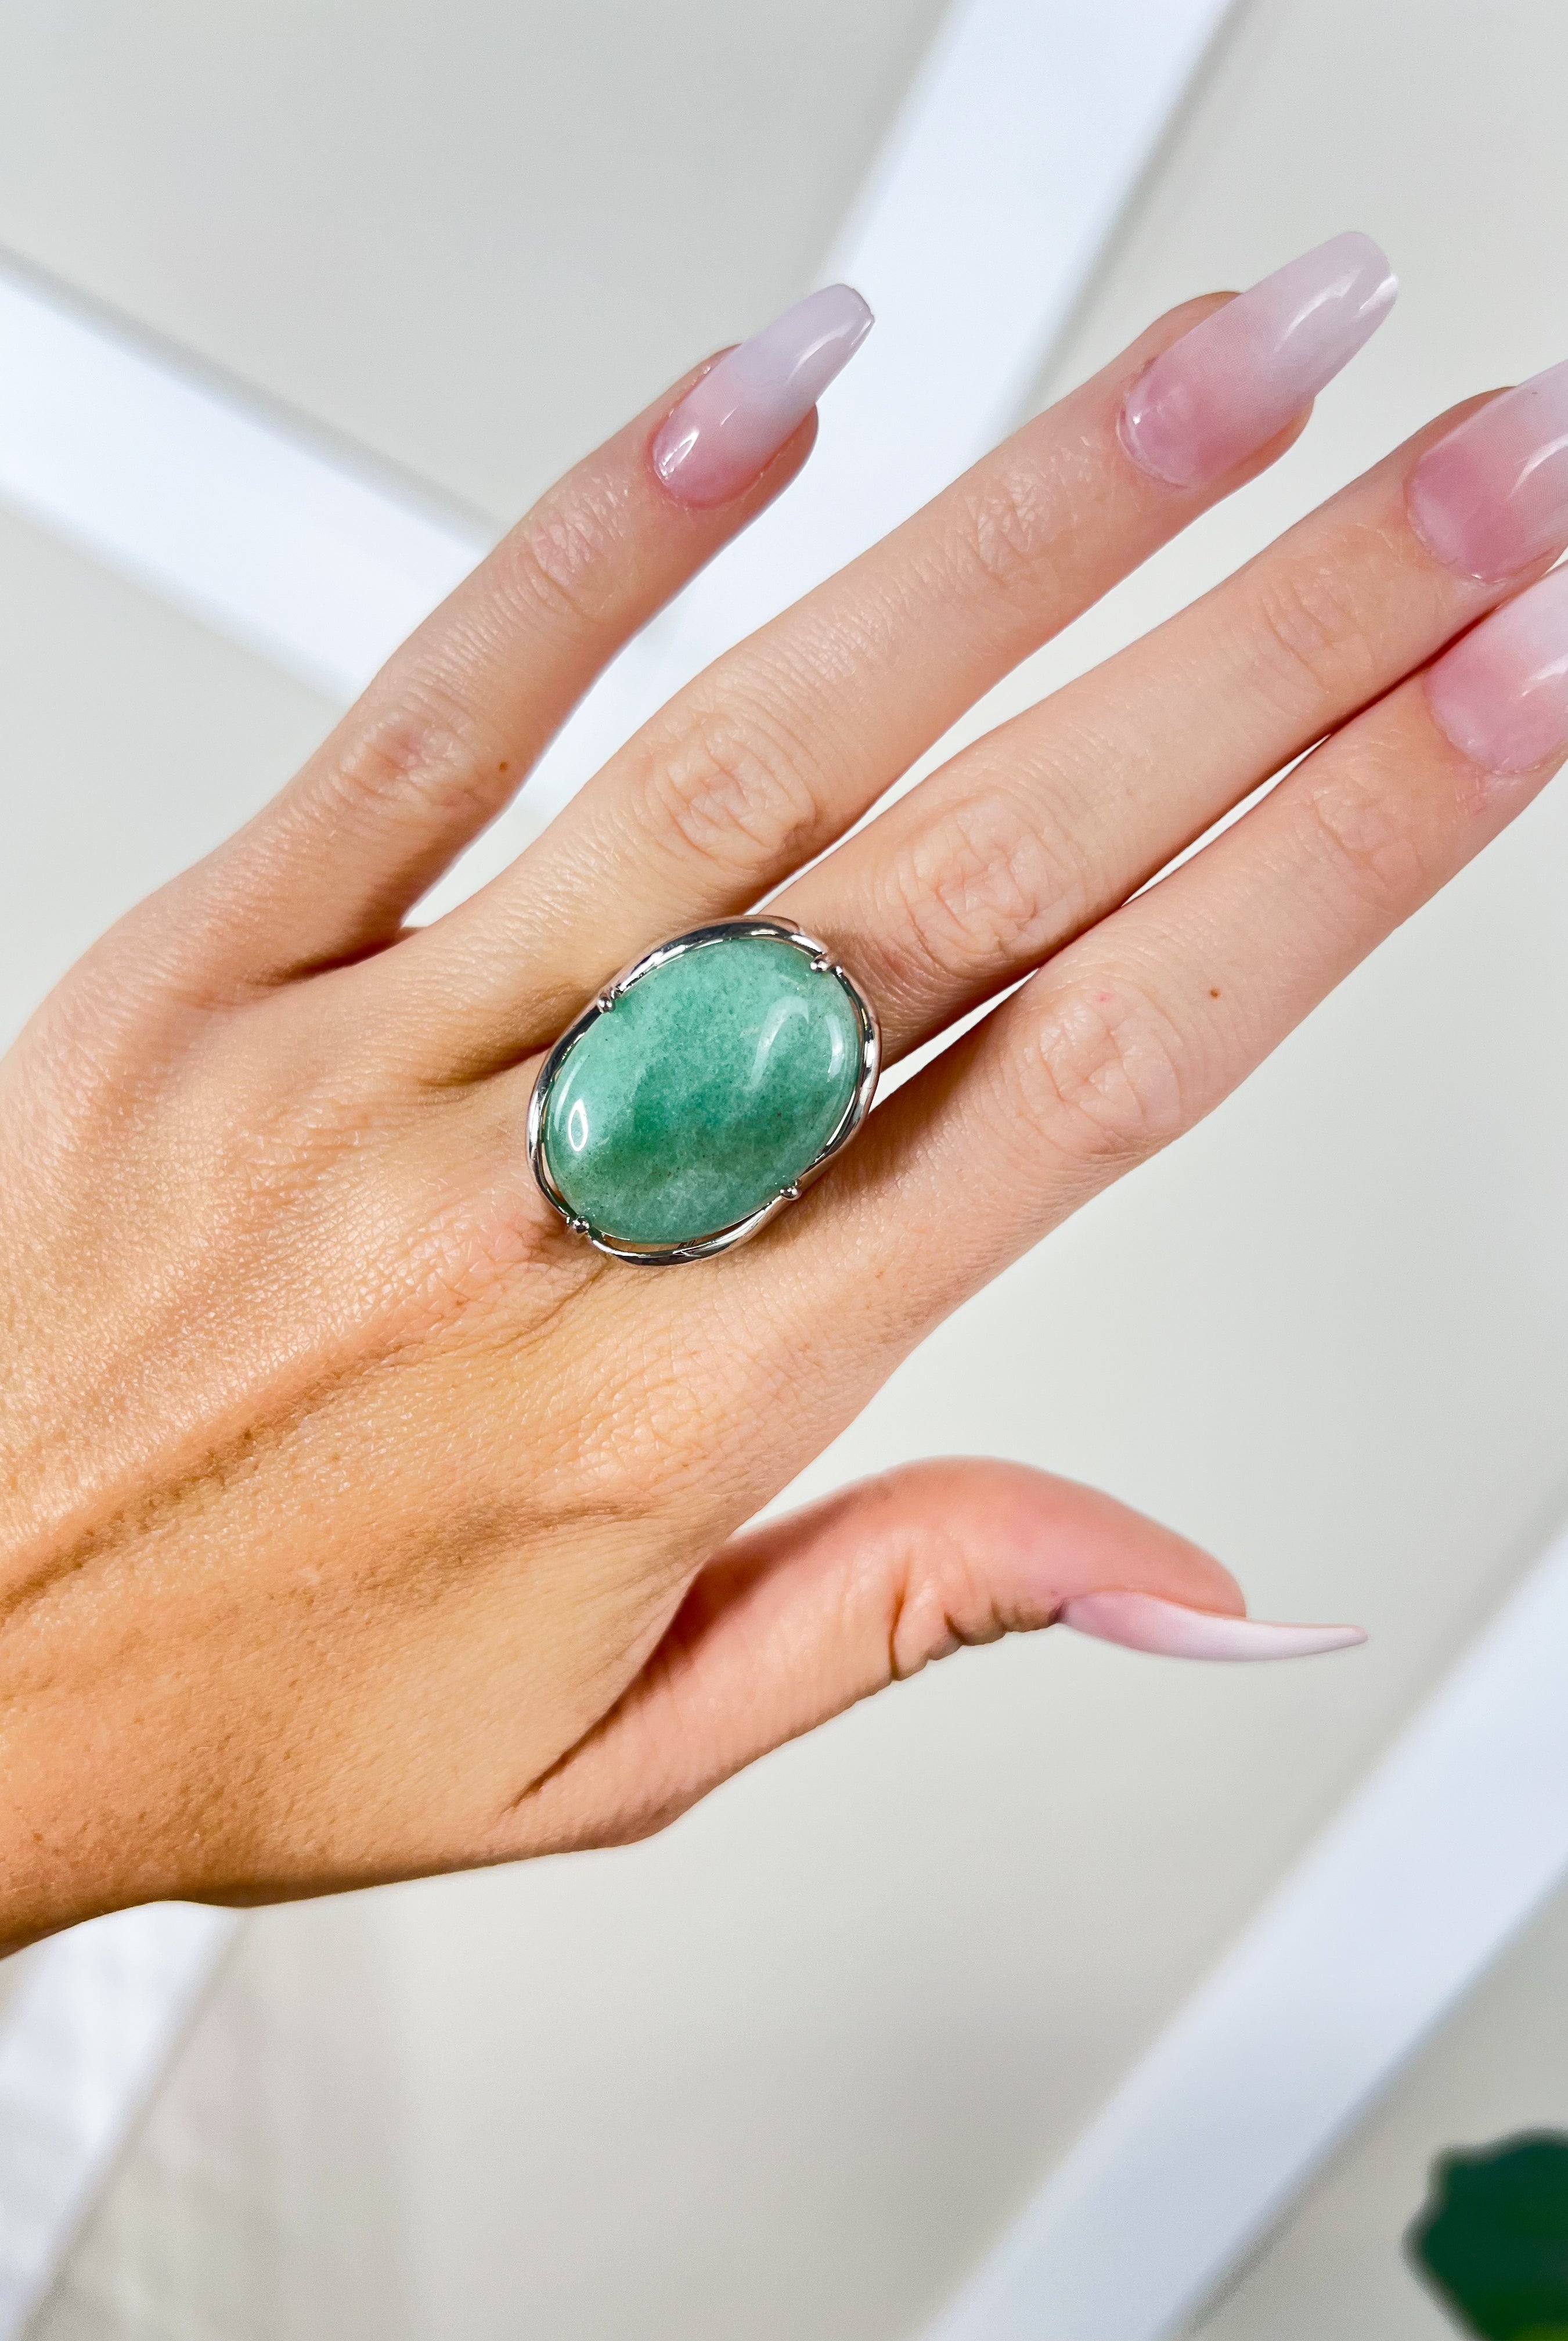 Large Gemstone RIng-310 Jewelry-Bridge Connections-Heathered Boho Boutique, Women's Fashion and Accessories in Palmetto, FL